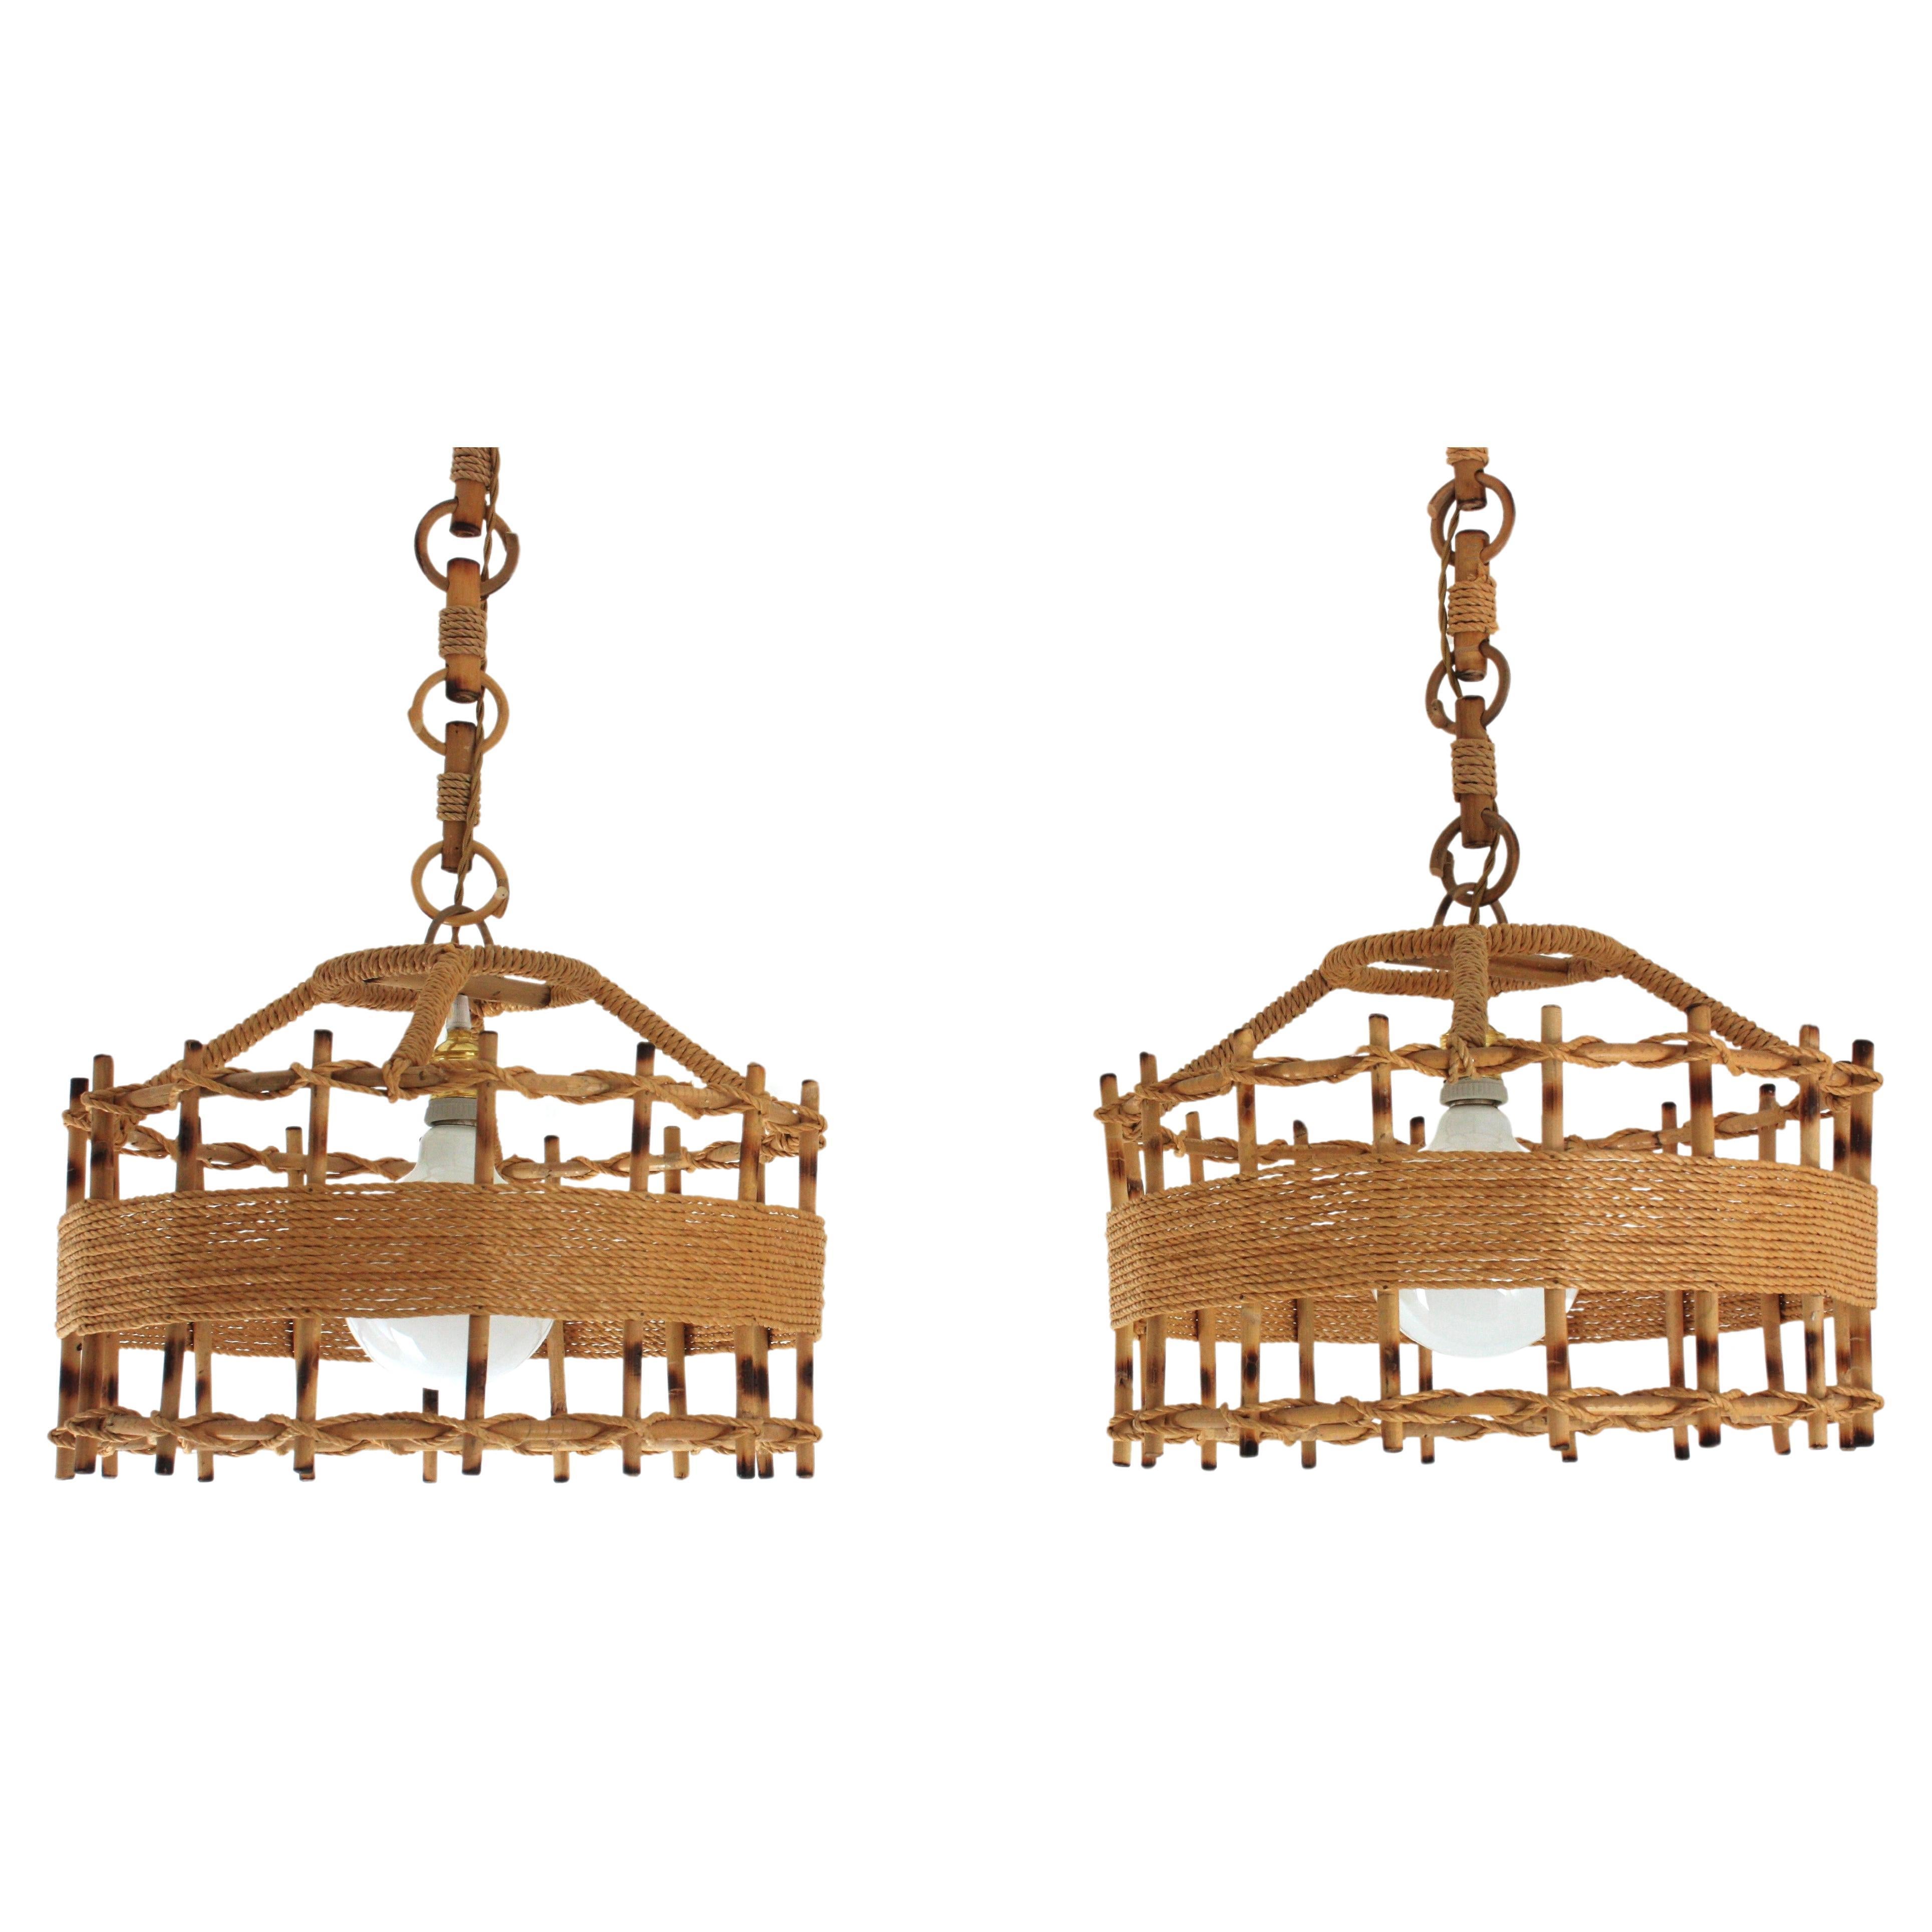 Pair of  handcrafted rattan drum shaped ceiling suspension lamps in rope and rattan. Spain, 1960s
This large artisan lanterns has an eye-catching design featuring a cylindrical structure made of rattan sticks wraped and detailed with jute rope.